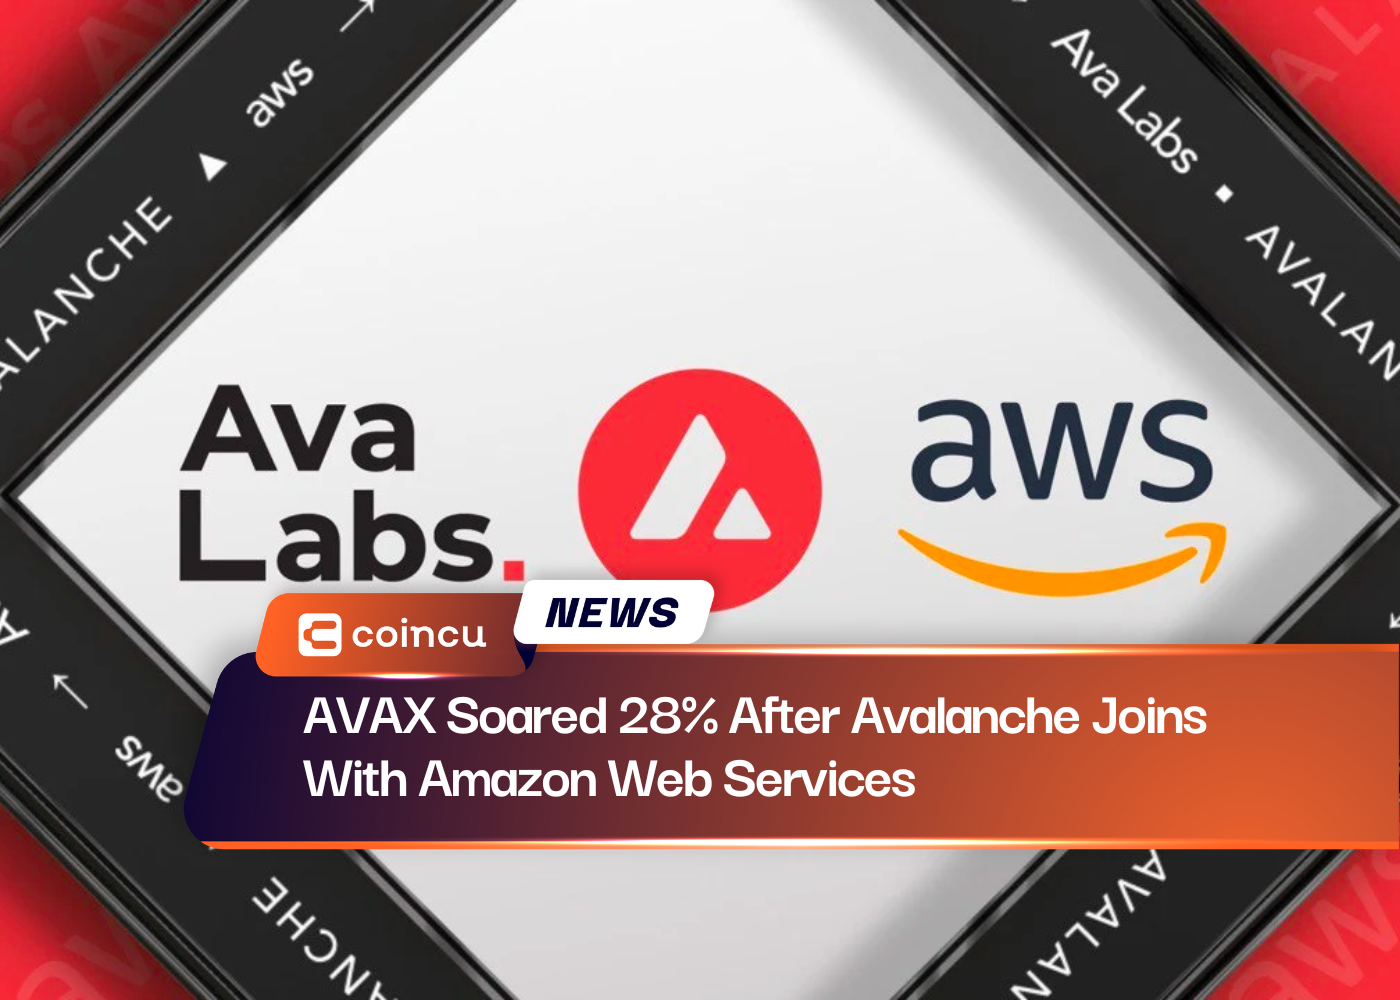 AVAX Soared 28% After Avalanche Joins With Amazon Web Services